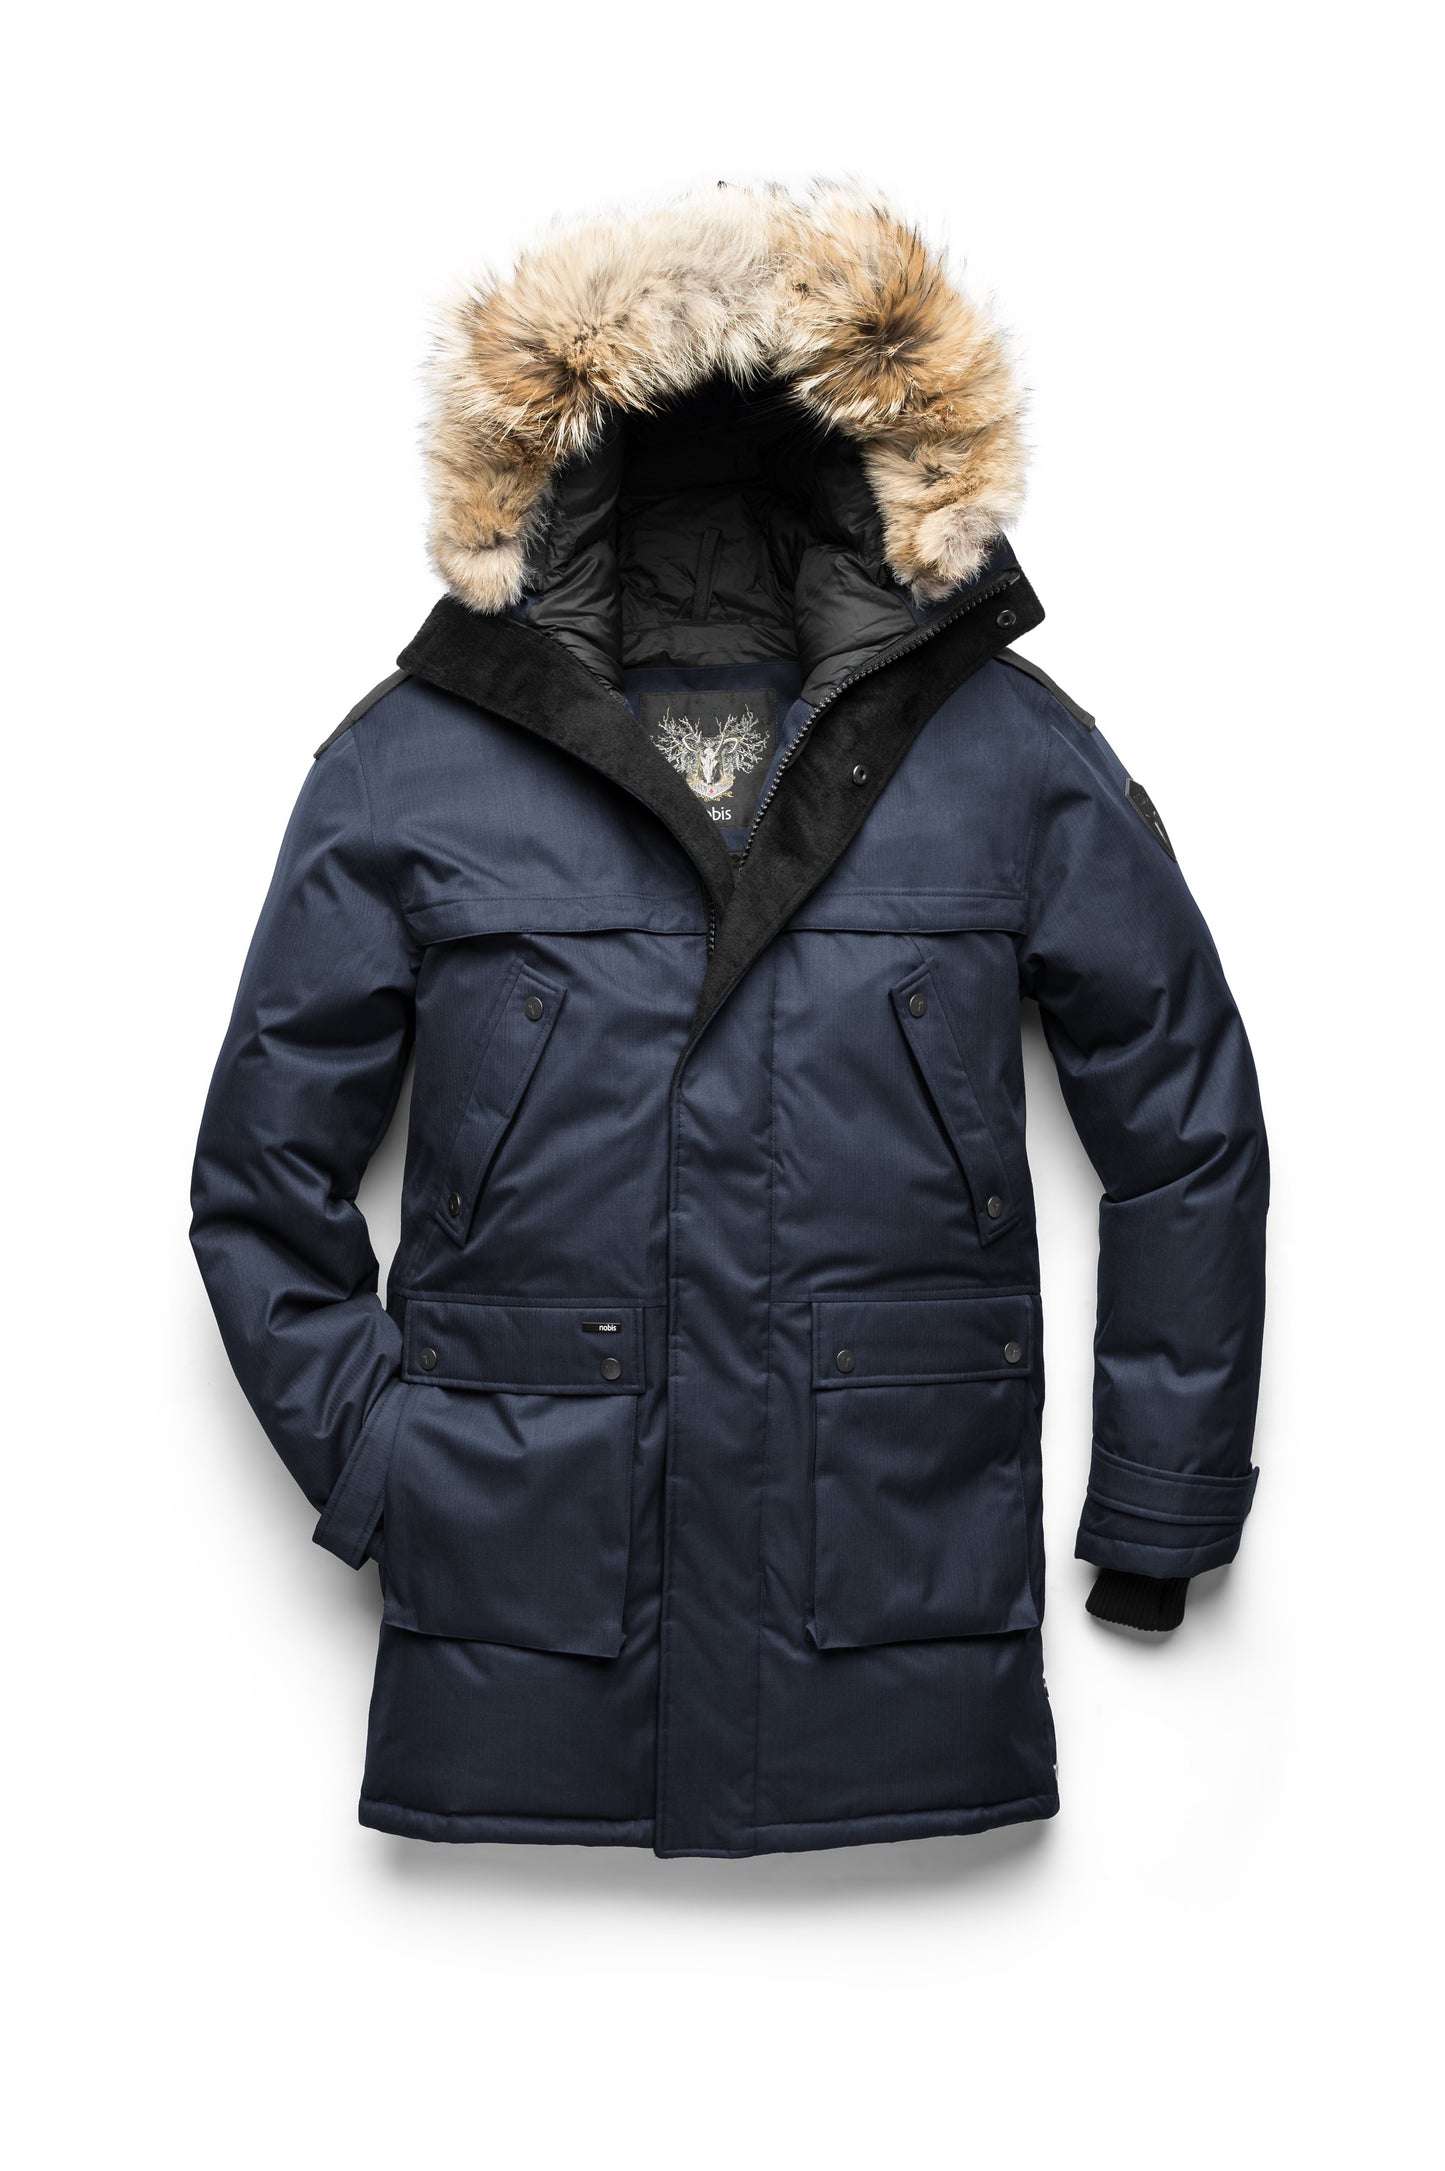 Men's Best Selling Parka the Yatesy is a down filled jacket with a zipper closure and magnetic placket in CH Navy